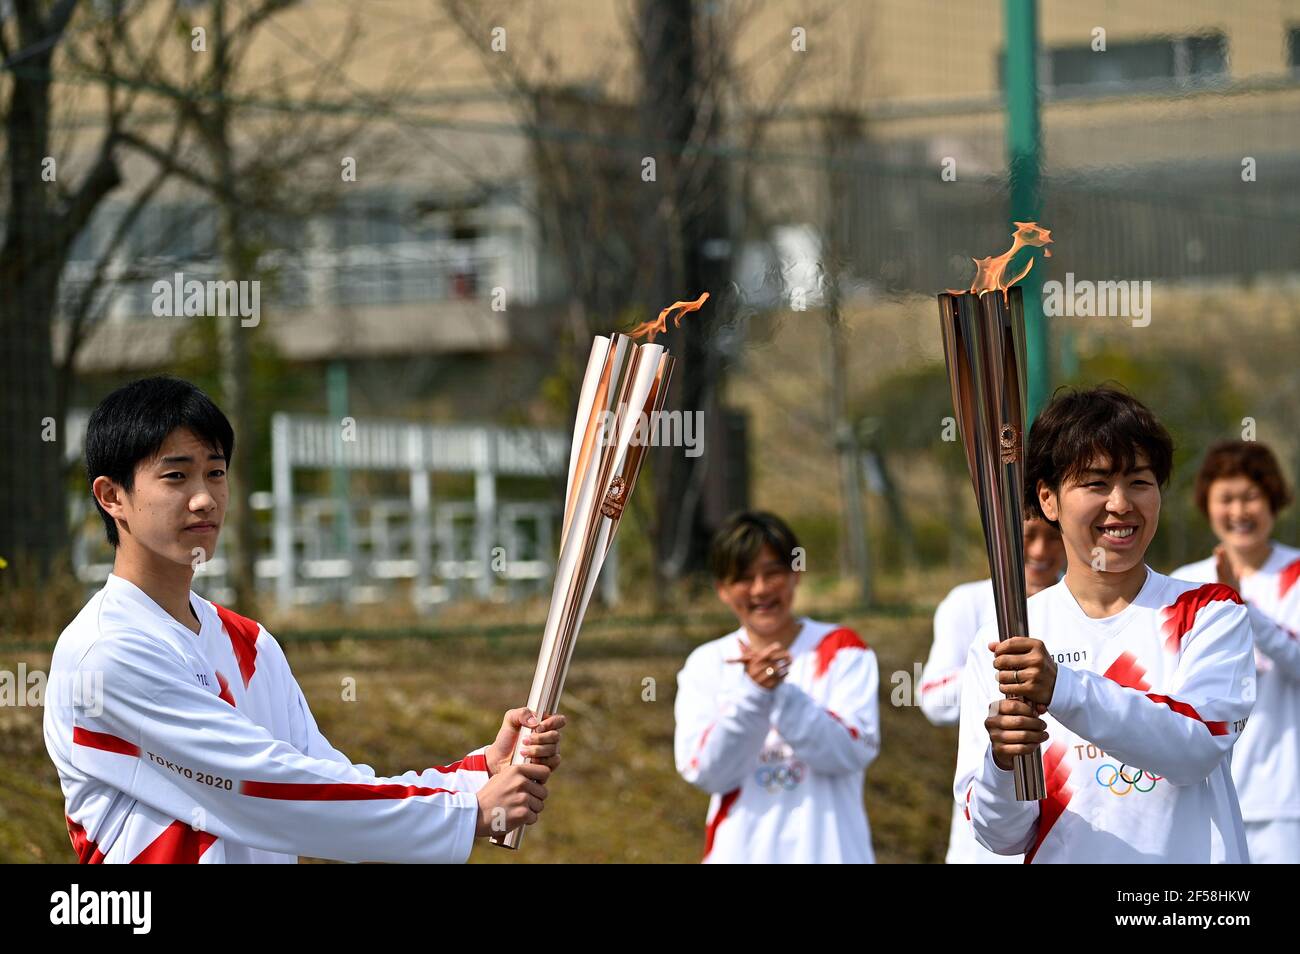 FUKUSHIMA, March 25, 2021  Iwashimizu Azusa (R, front), former member of 'Nadeshiko Japan', the Japan women's National Football Team, and Japanese high school student Asato Owada are seen on the first day of the Tokyo 2020 Olympic torch relay in Futaba, Fukushima of Japan, on March 25, 2021. (Philip Fong/POOL via Xinhua) Stock Photo